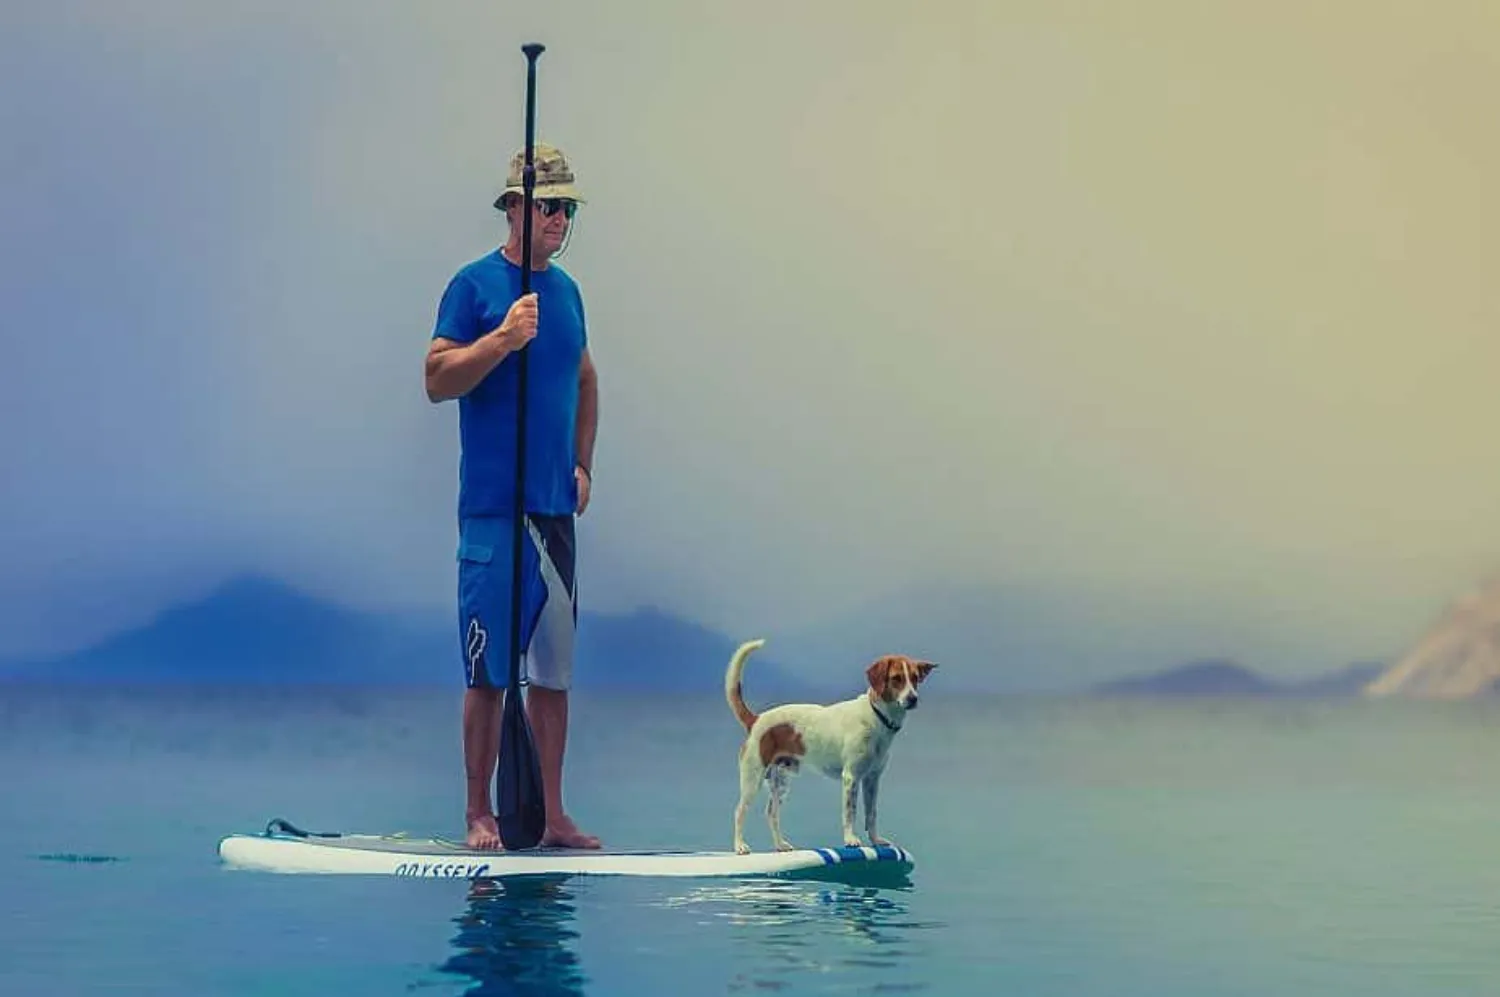 Paddleboarding for Adults 50+